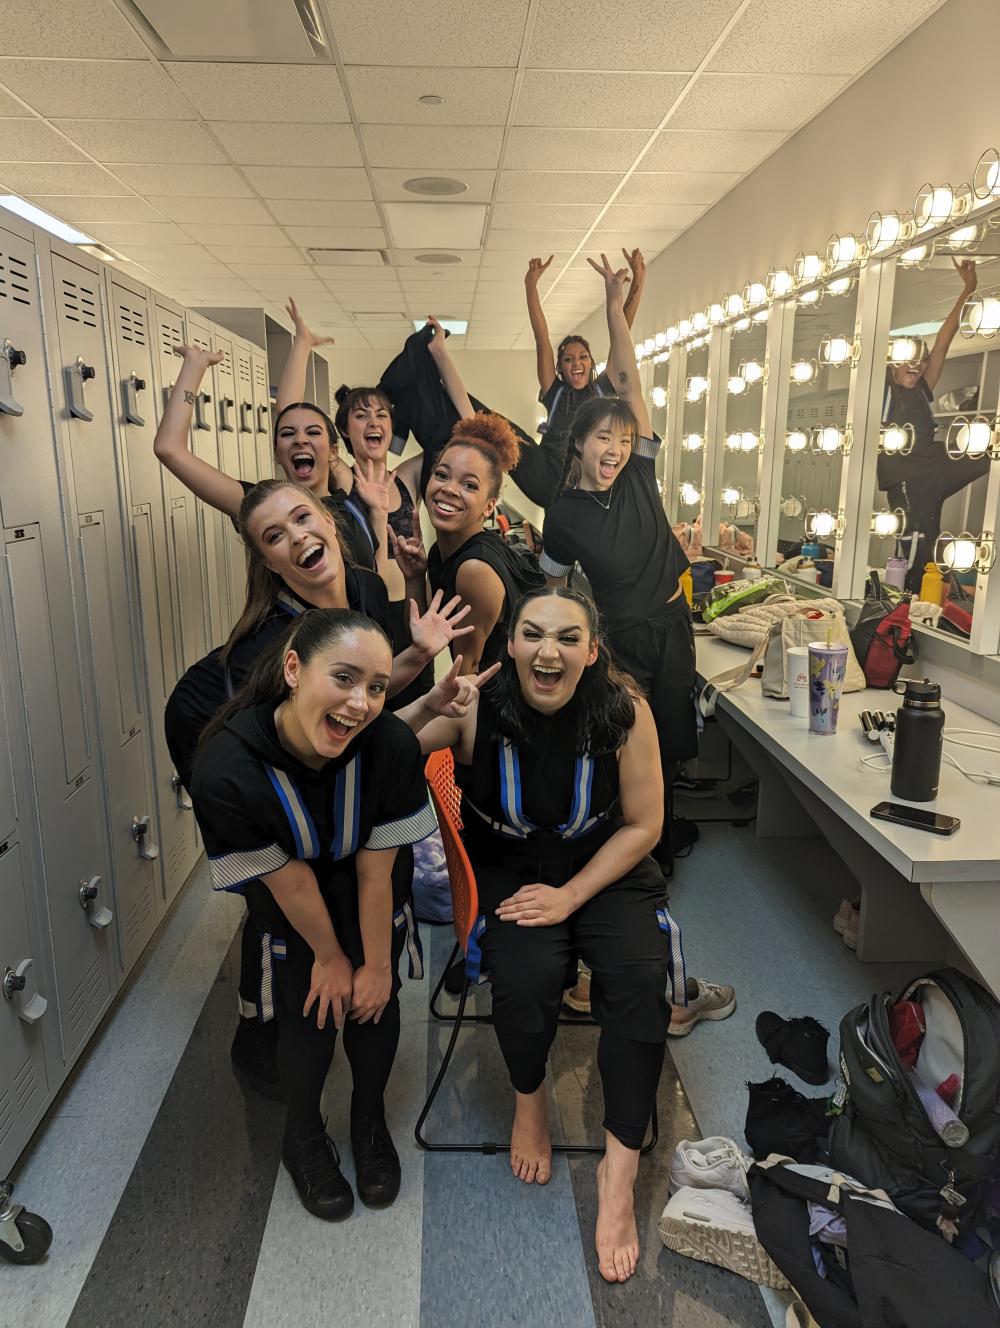 eight dancers pose with their arms raised excitedly in a dressing room with mirrors on one side and lockers on the other